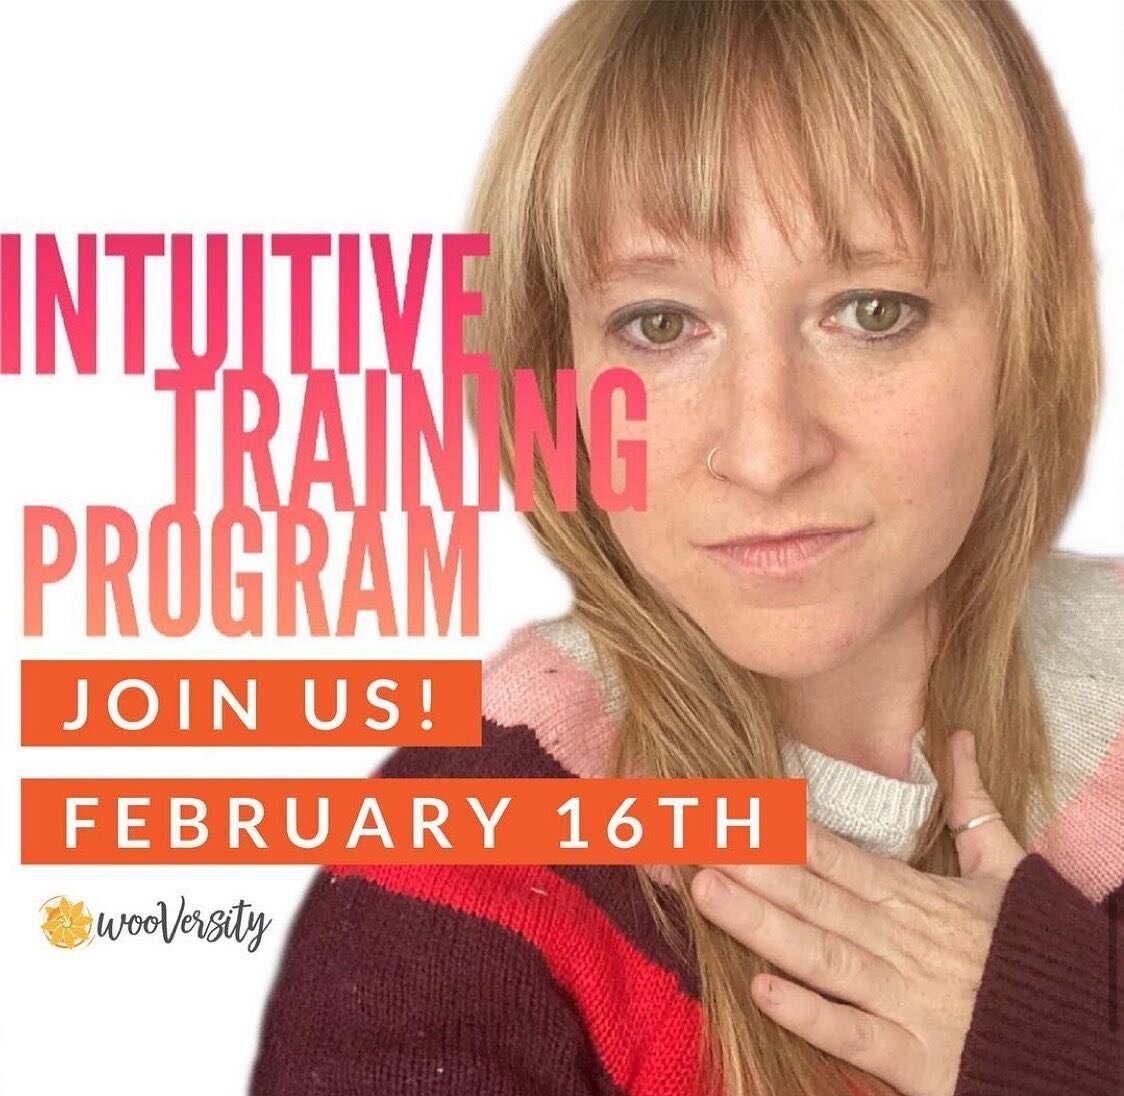 Repost from @wooversity
&bull;
Woohoo!! Another chance to join the #intuitive training program is just around the corner! Thursday, February 16th.  Link with more deets in bio ⬆️
.
.
#meditation #mindfulness #energyhealing #pastlifehealing #aura #cha